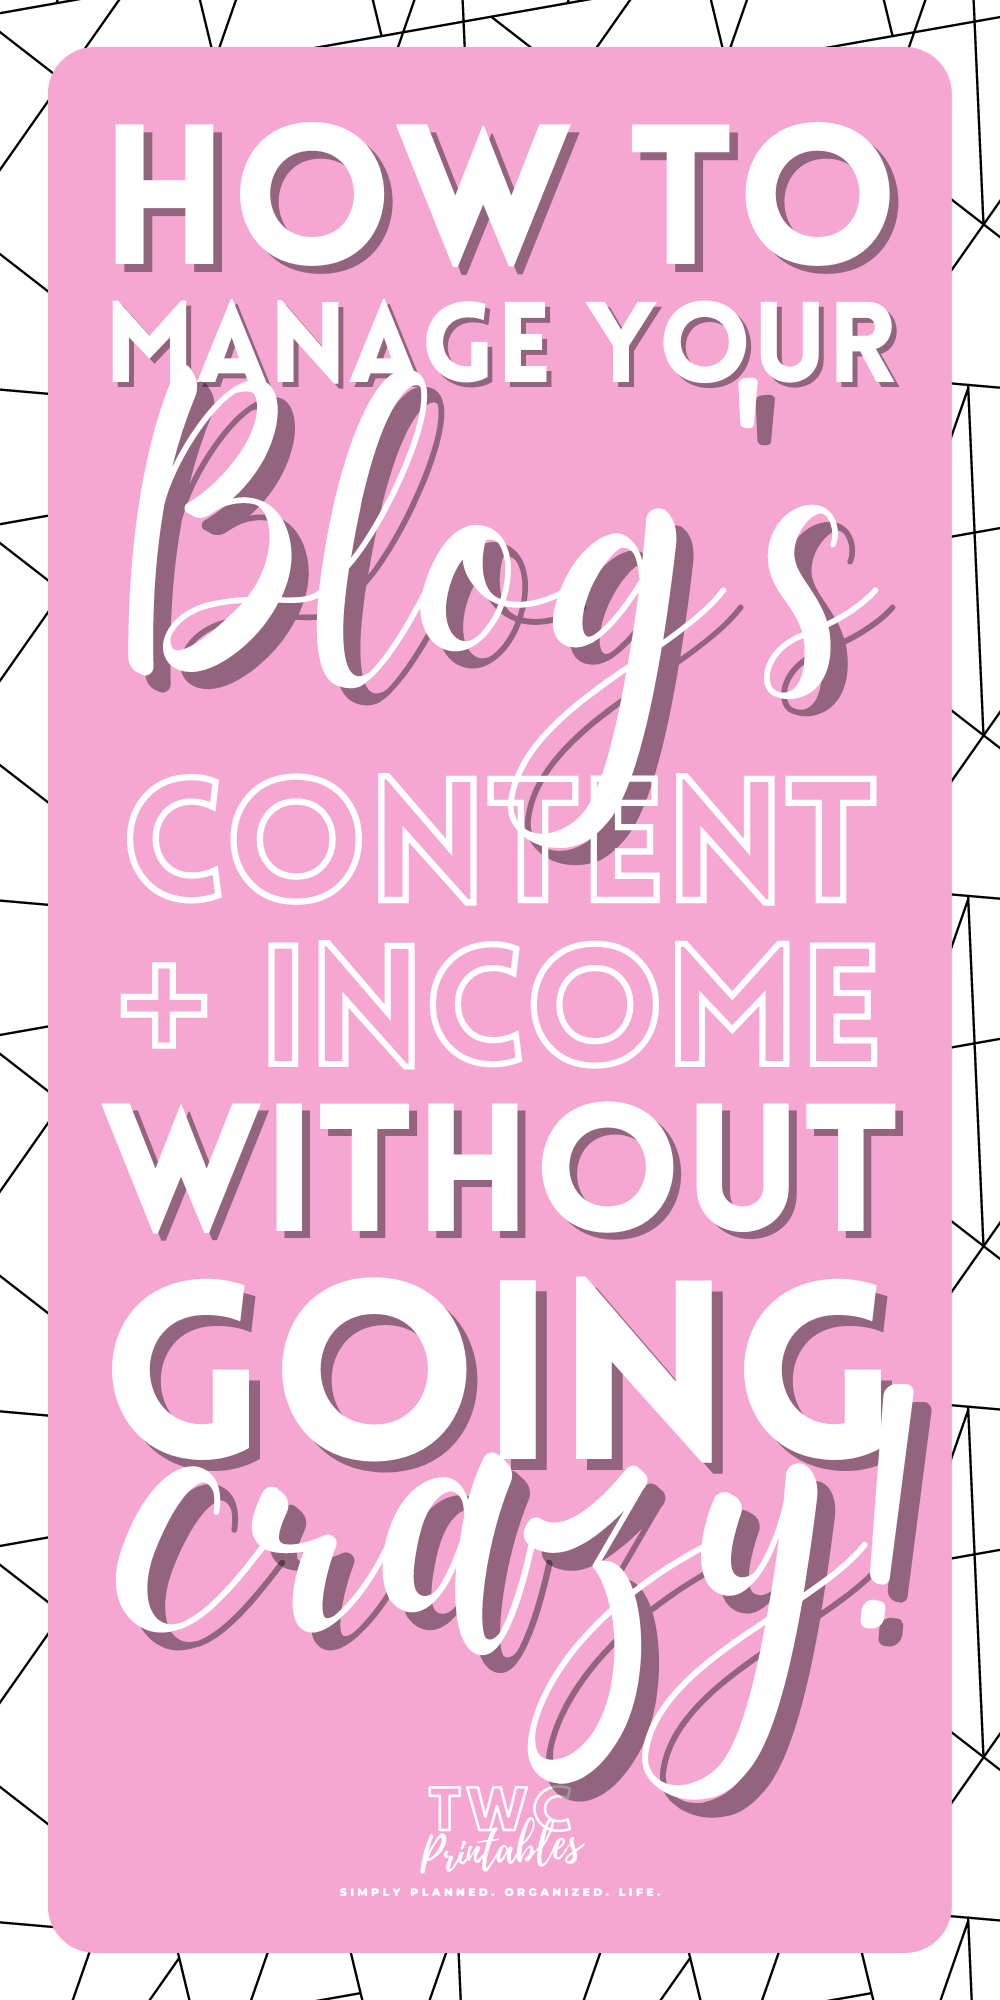 How to manage your blog content and income without going crazy blog post